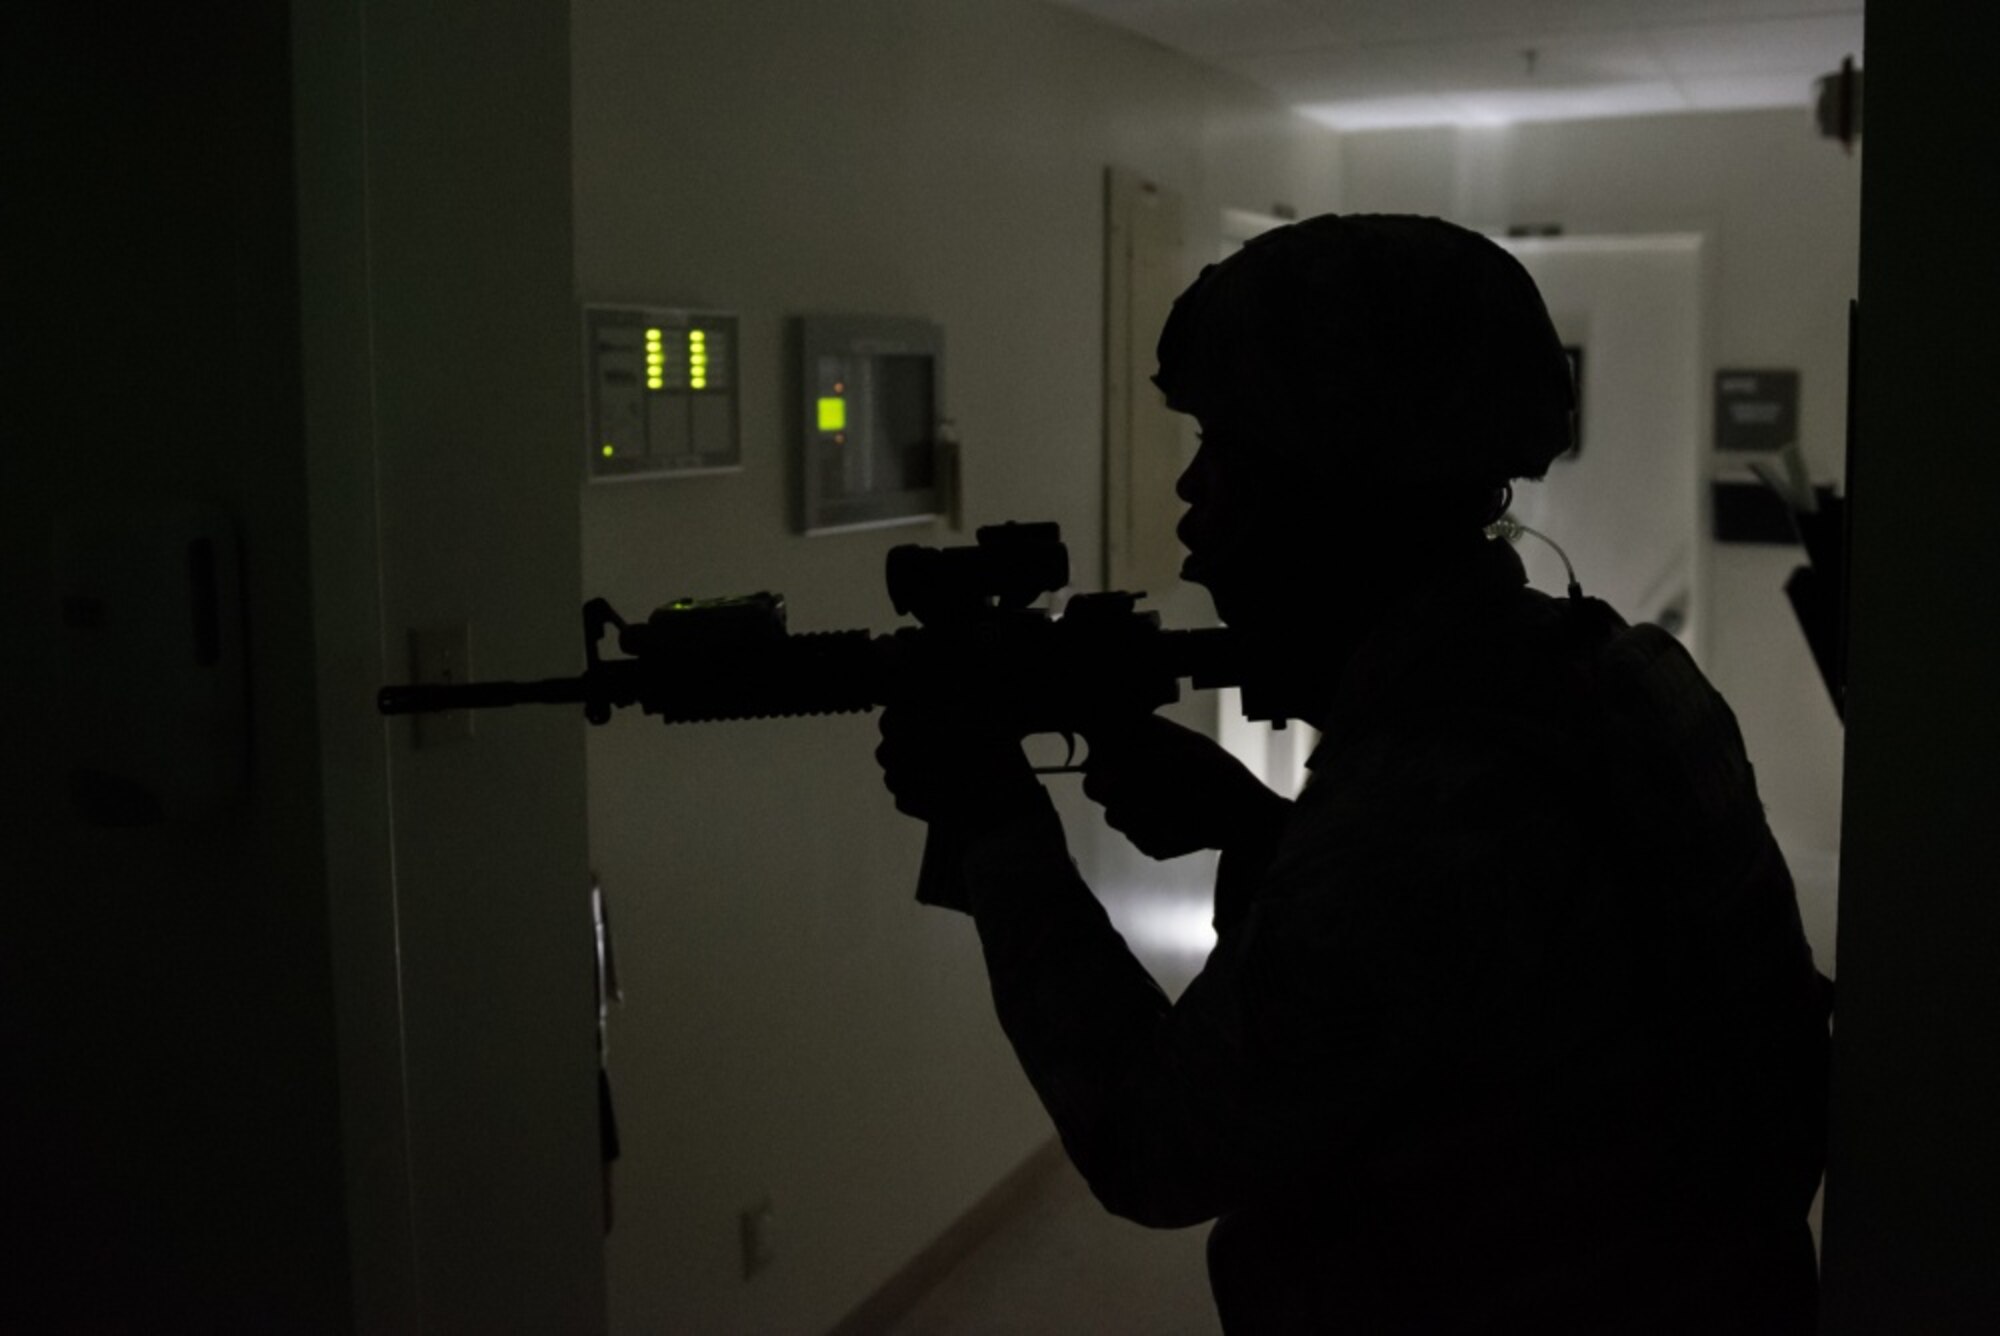 U.S. Air Force Staff Sgt. Gene McLaurin, 36th Security Forces Squadron, searches for additional threats after an active shooter was neutralized during an emergency management exercise May 11, 2017, at Andersen Air Force Base, Guam. When known active shooters are no longer a threat, SFS Airmen clear the building to ensure the area is safe. (U.S. Air Force photo by Airman 1st Class Jacob Skovo)